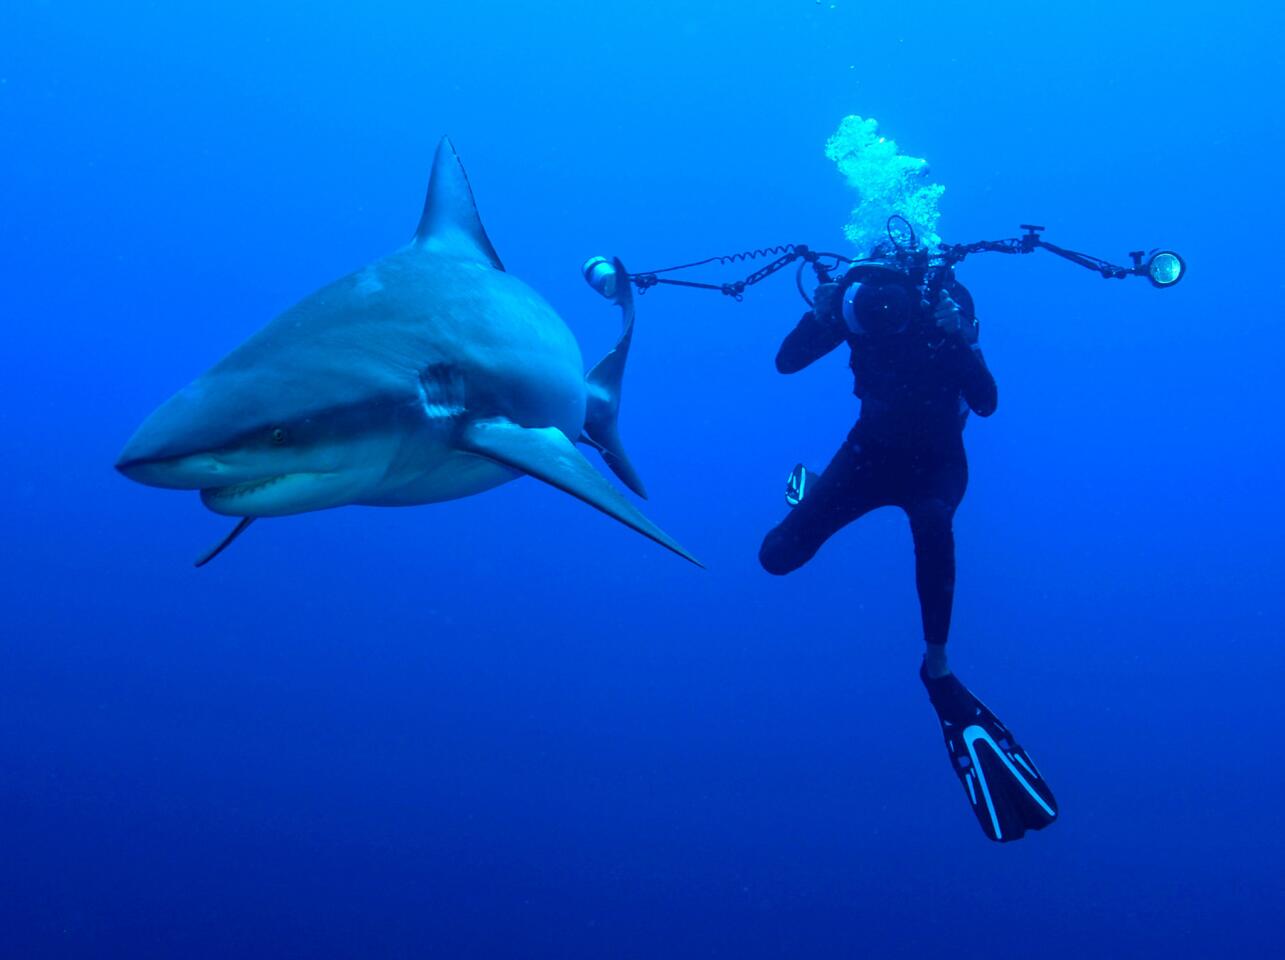 Underwater photographer Fiona Ayerst captures a picture of a bull shark off the coast of Mozambique. Bull sharks are among the "big three" that researchers consider most deadly because they are commonly found in populated areas where humans enter the water and because they are large species whose teeth are designed to shred, not hold.